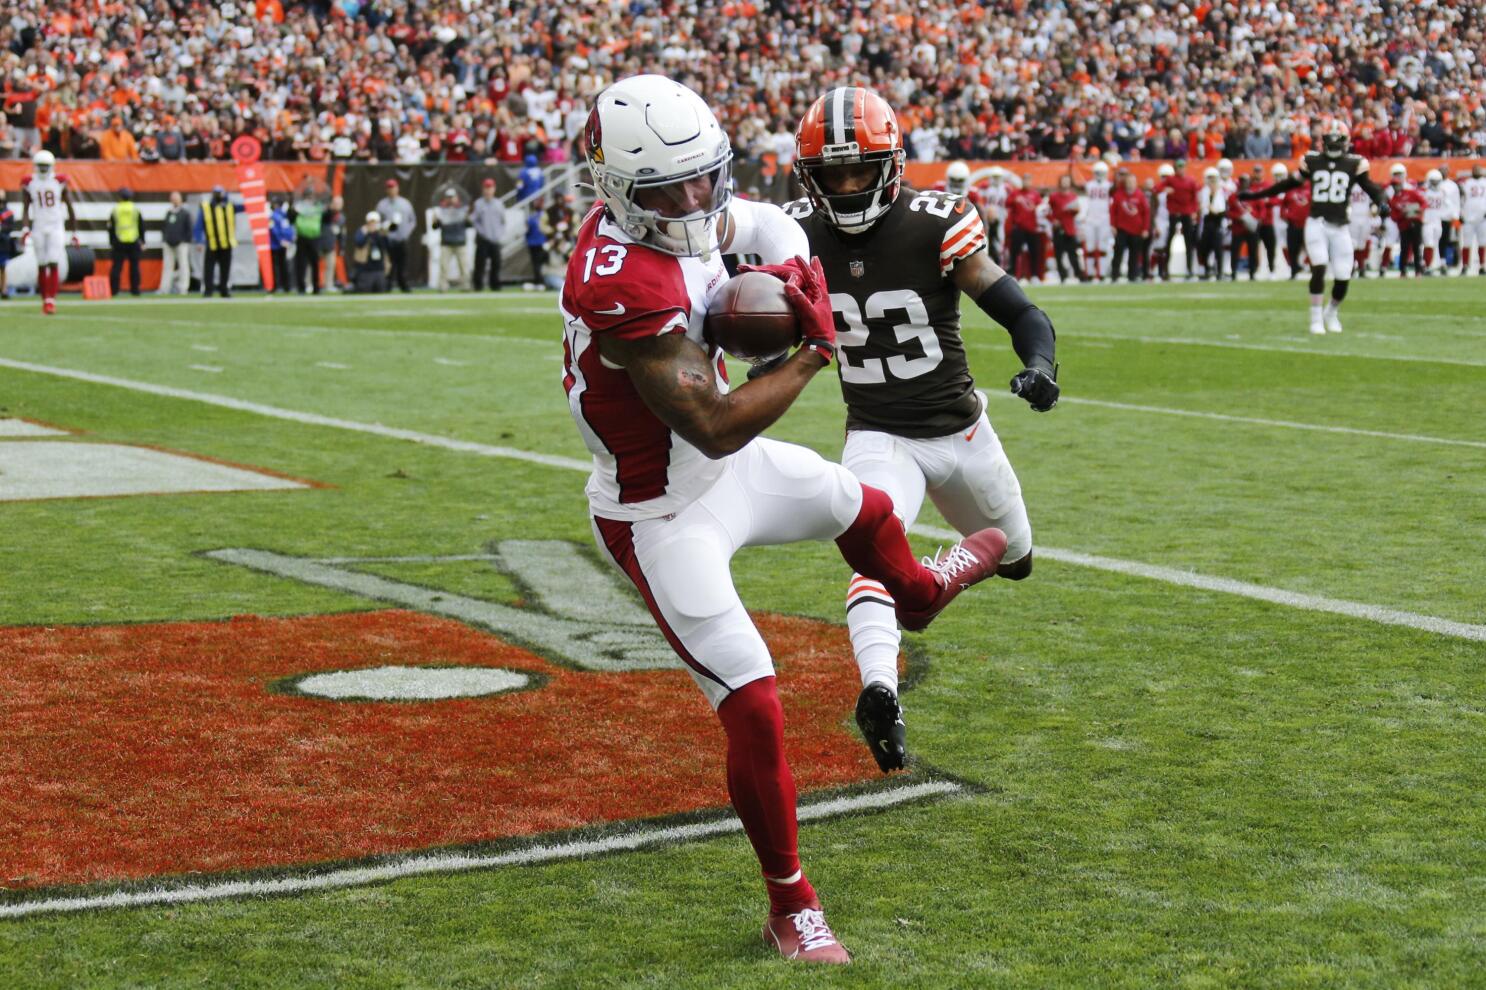 A.J. Green could disappoint for the Arizona Cardinals according to